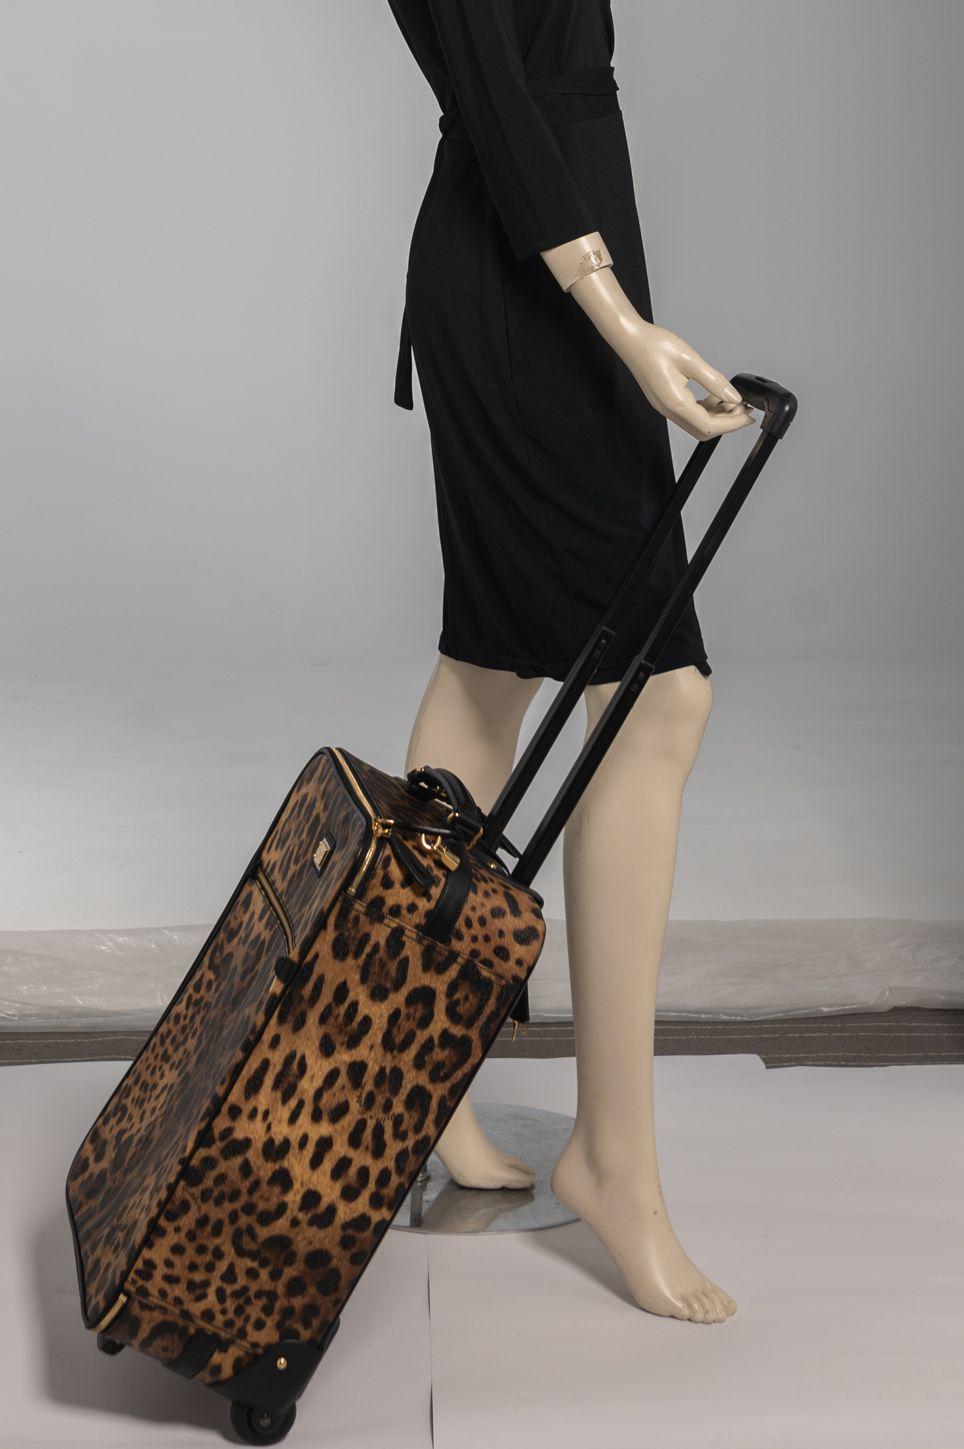 Dolce Cheetah Print Carry On Luggage In Excellent Condition For Sale In West Hollywood, CA